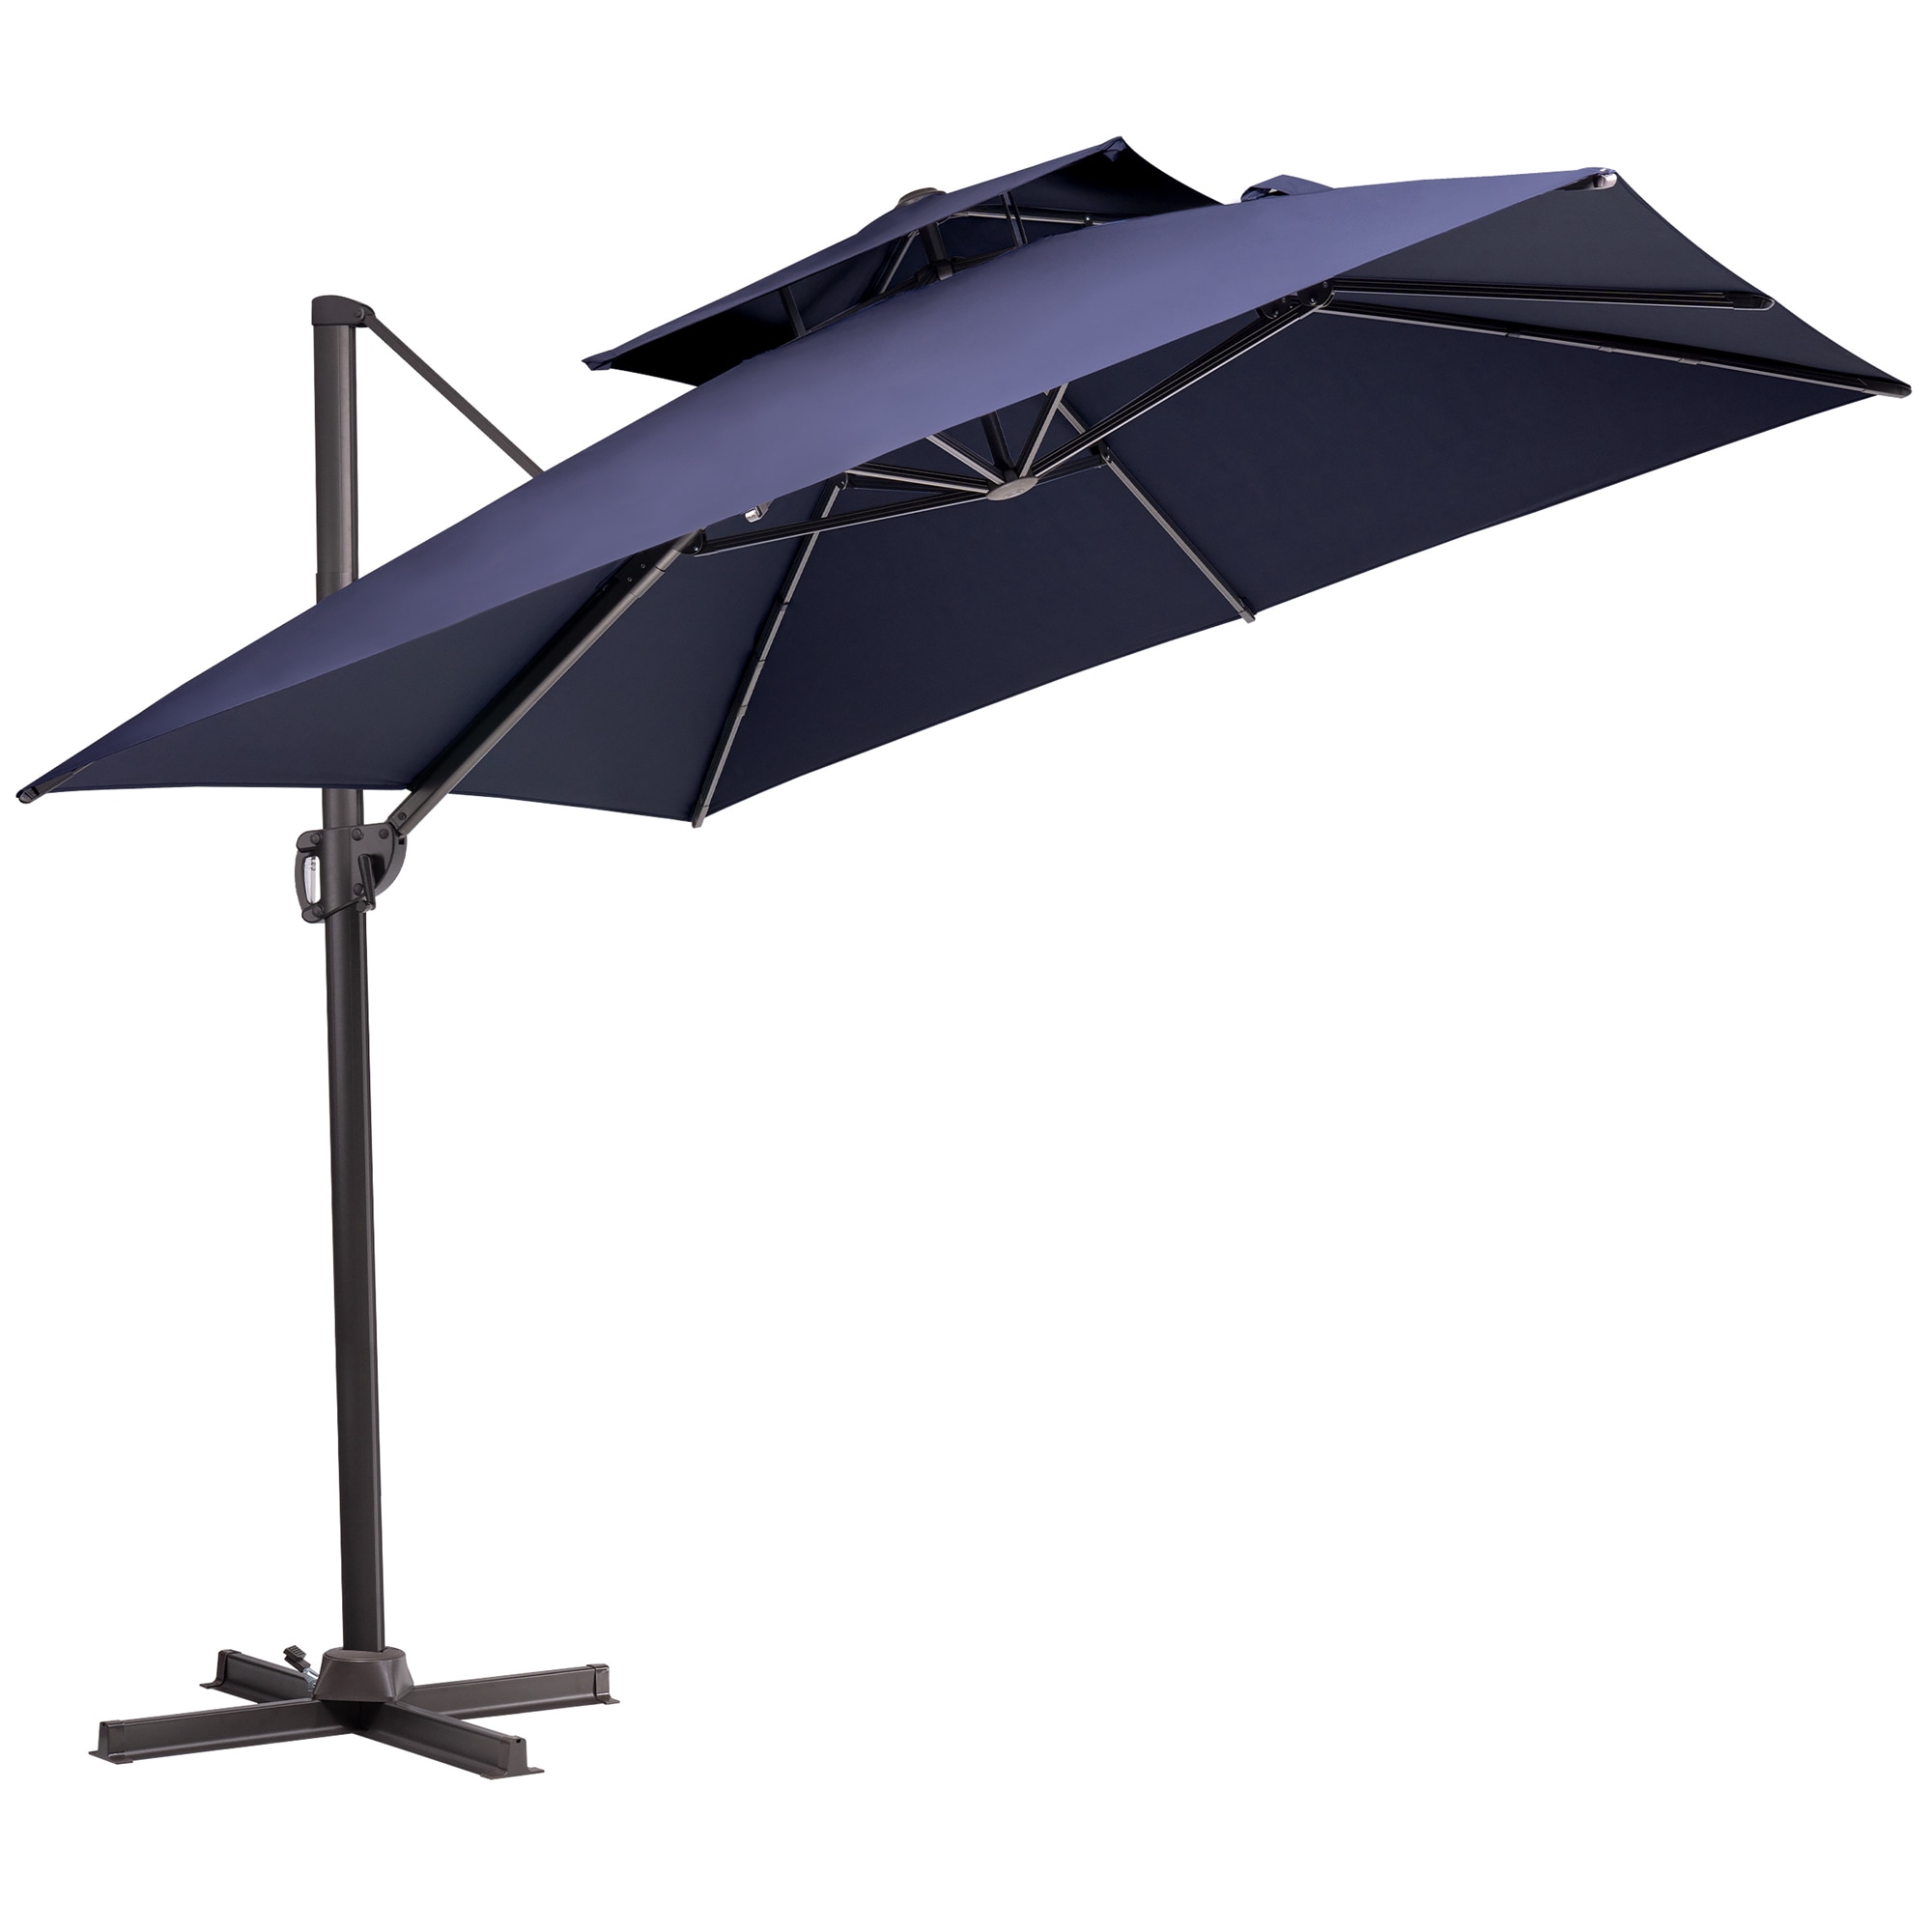 Crestlive Products Universal Patio Umbrella Replacement Canopy for 10ft 8 Ribs Offset Umbrellas Brown